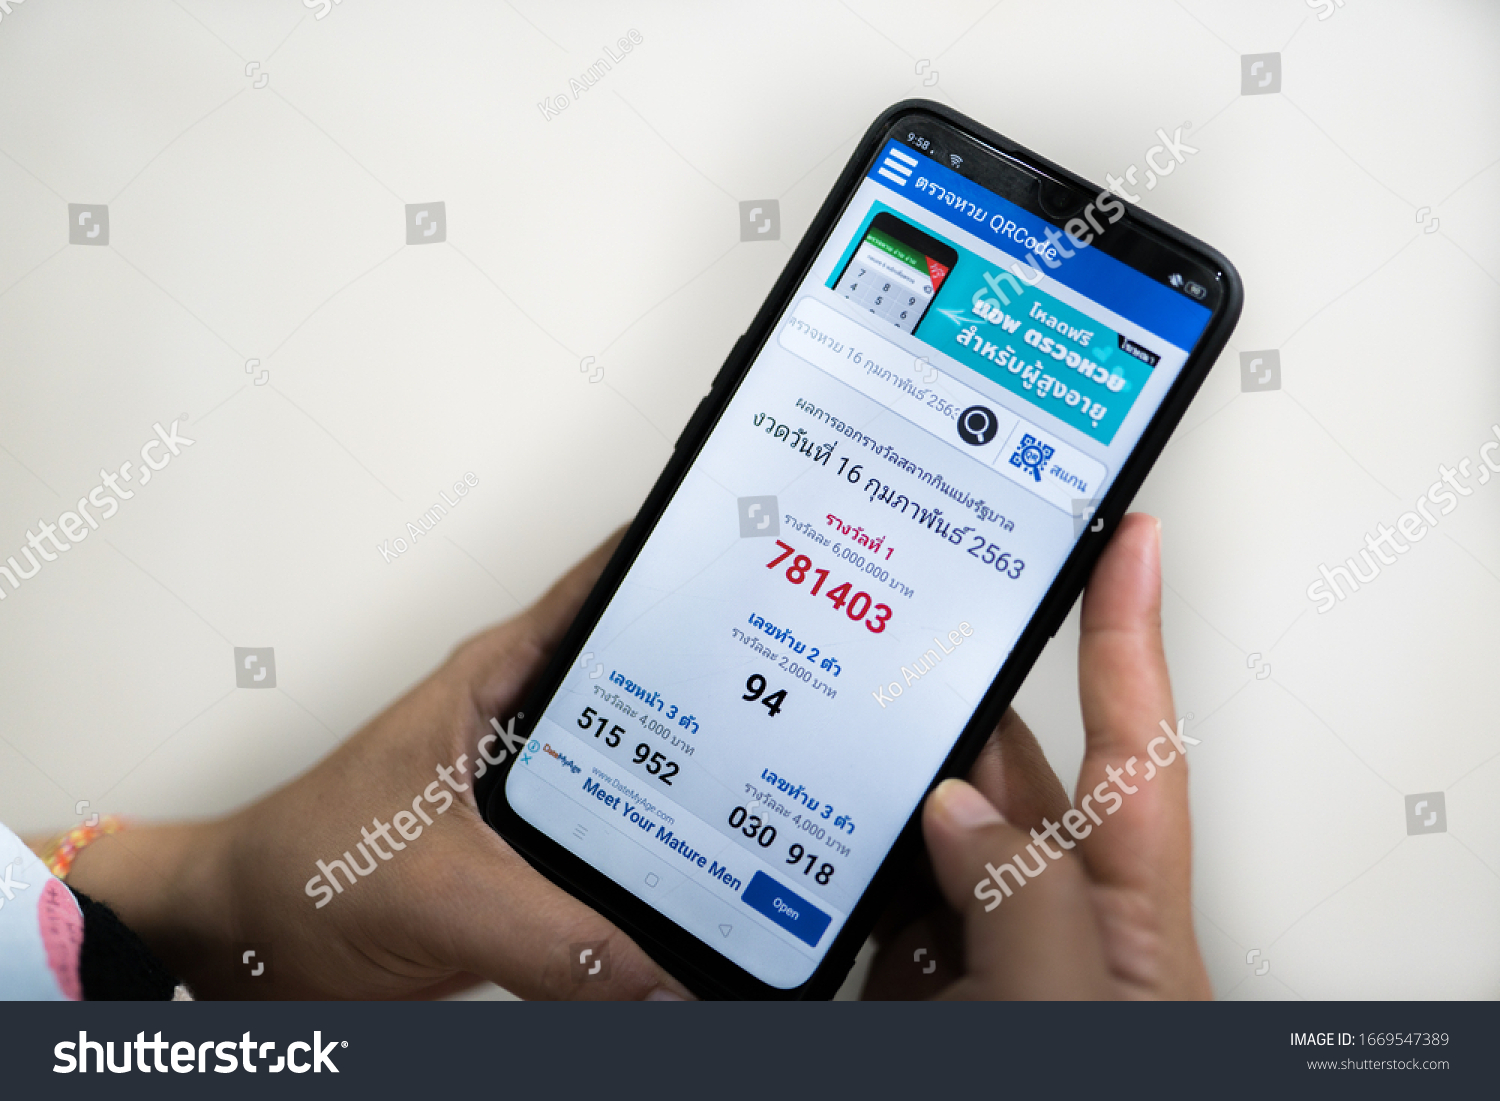 Kedah,Malaysia - 29-02-2020 : hand holding mobile phone with thailand lottery application which results come out every month. #1669547389